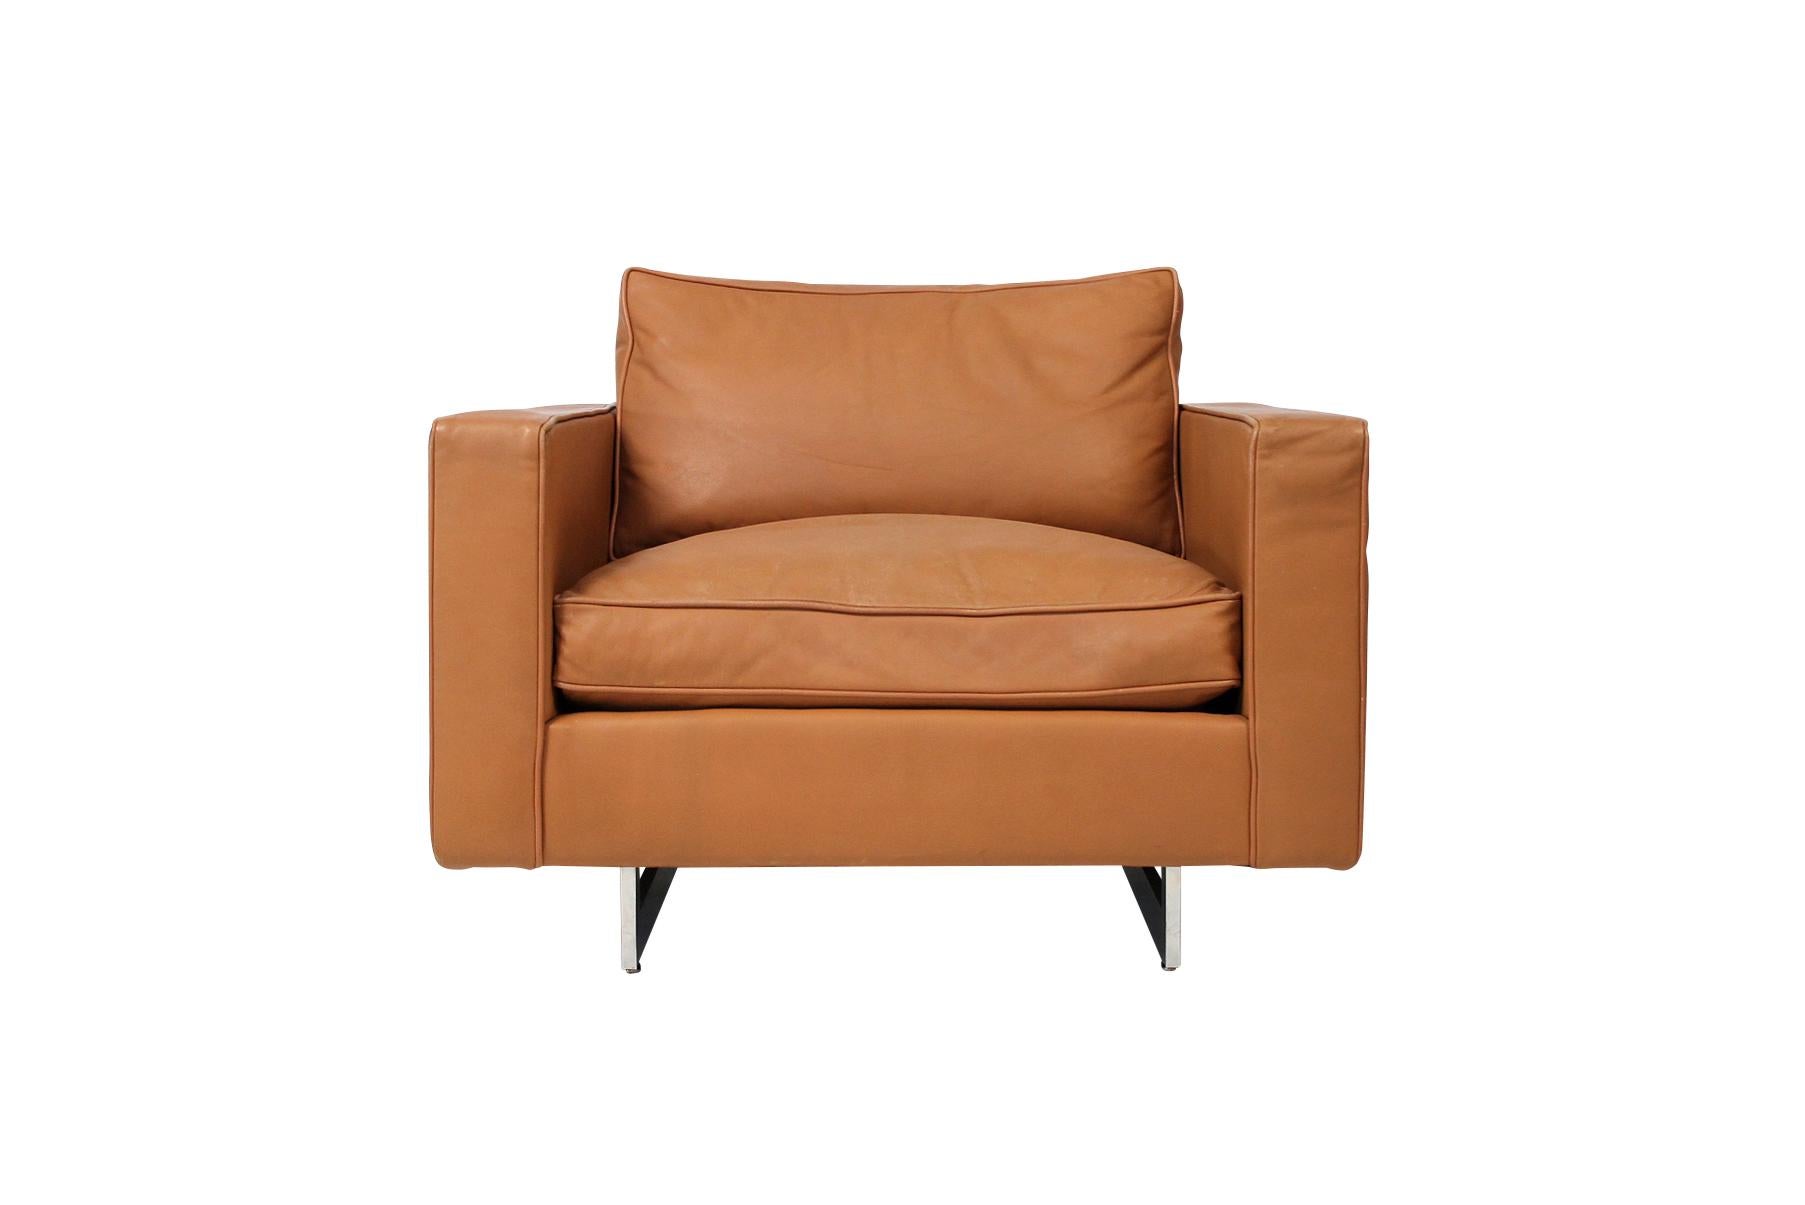 Rare large scale and comfortable lounge chair by noted American designer Jens Risom. In original brown leather with down cushions and chrome sled bases.